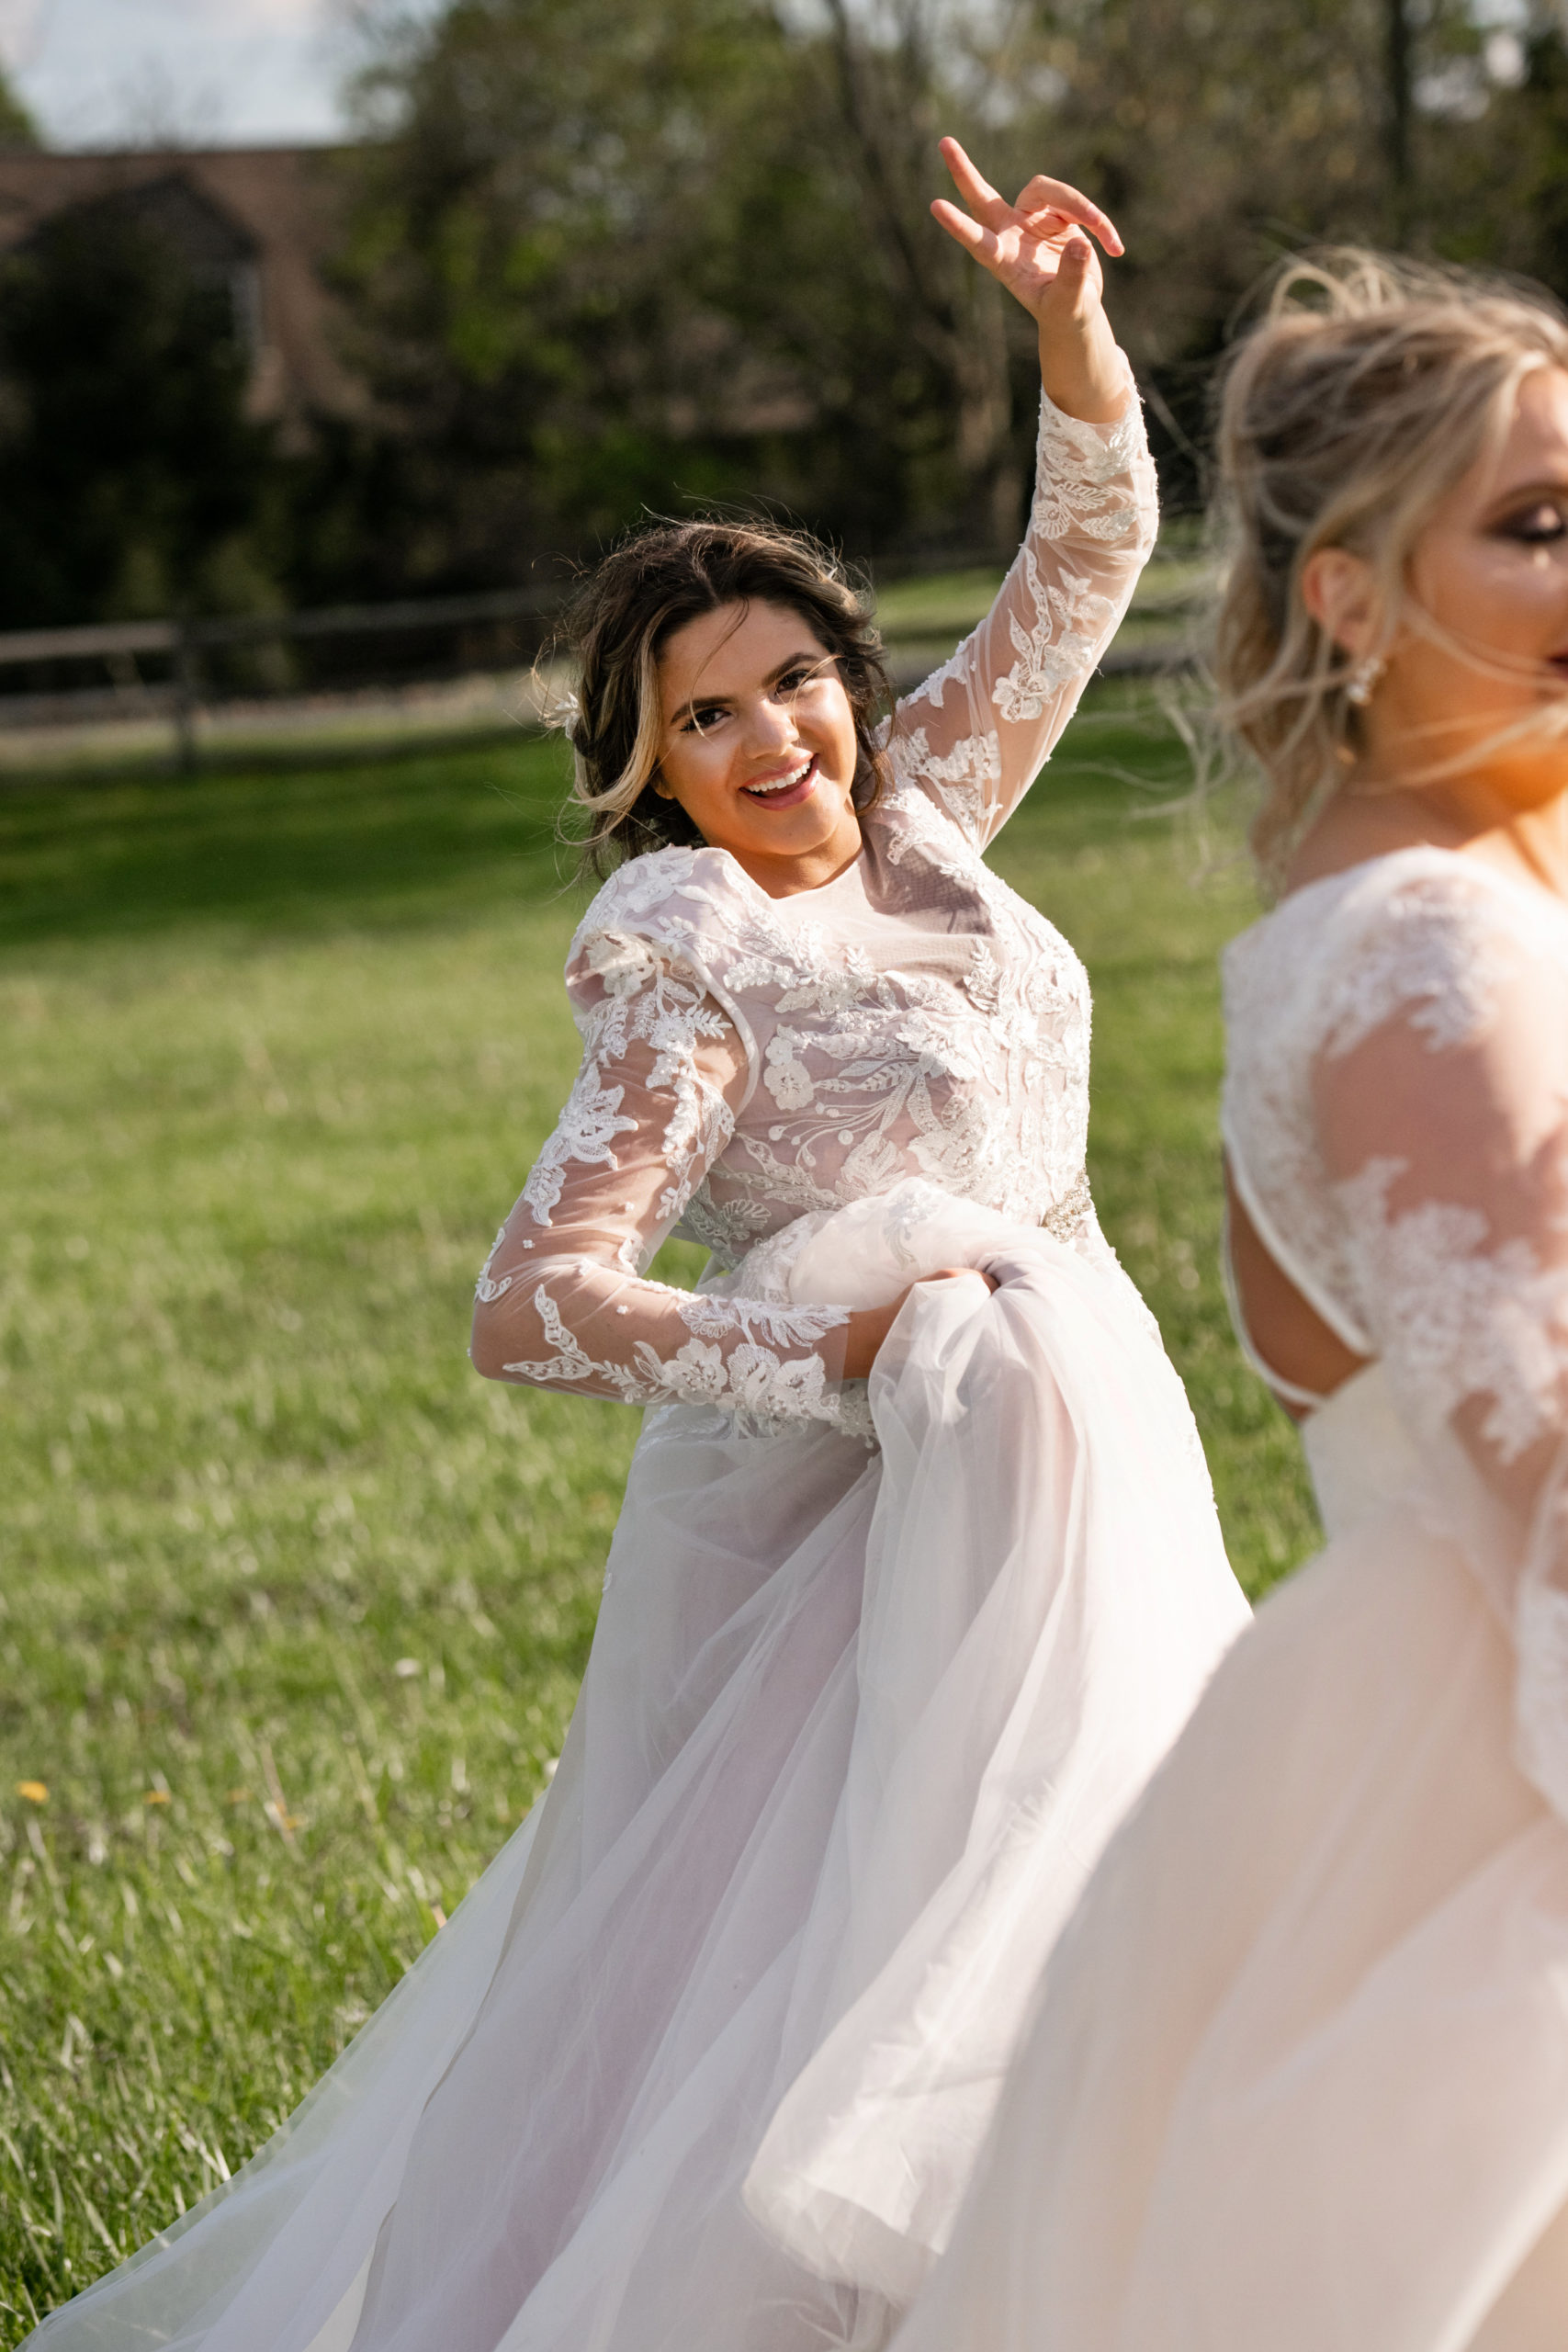 plus size wedding dress returns and exchanges policy | andi b bridal